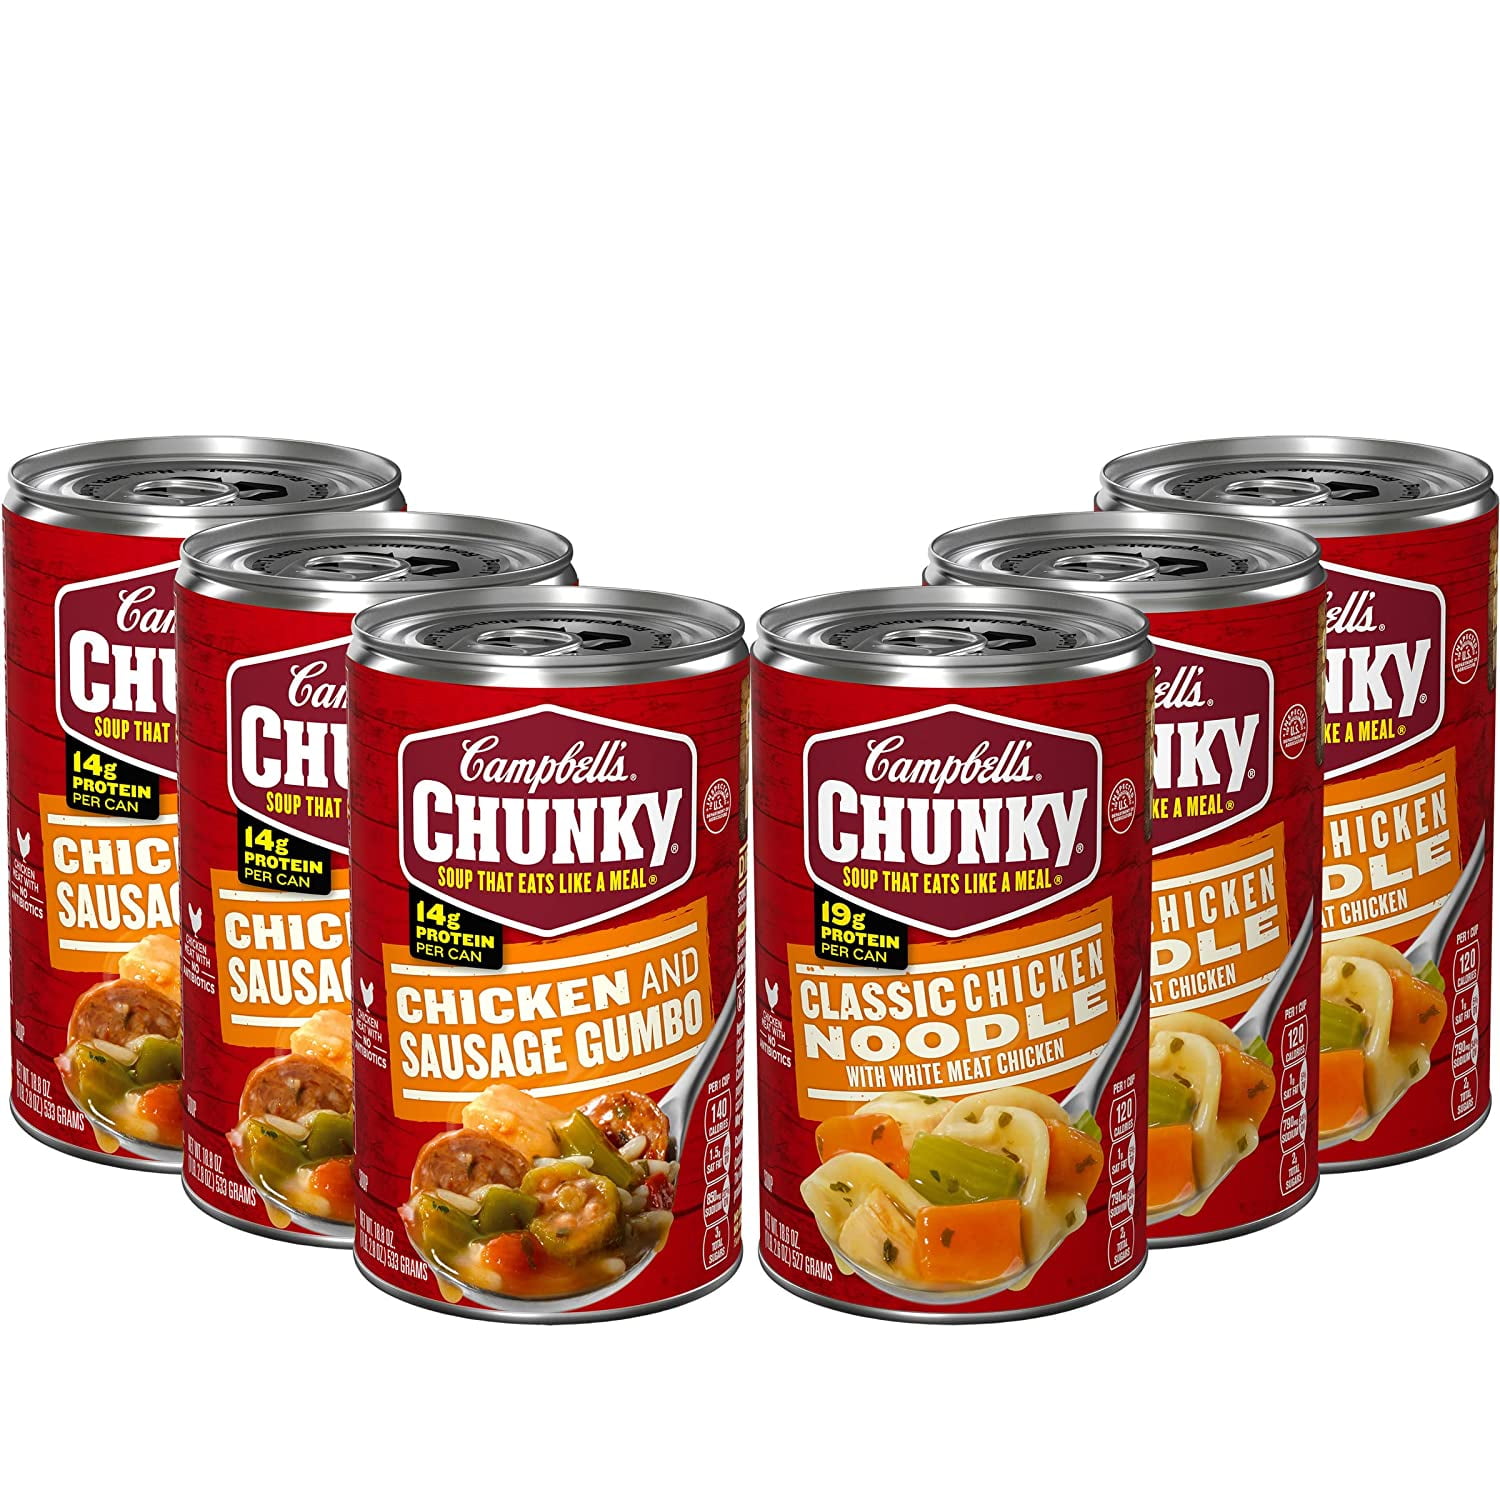 Campbell's CHICKEN GUMBO SOUP, 6 Pack! 10.5 oz Cans